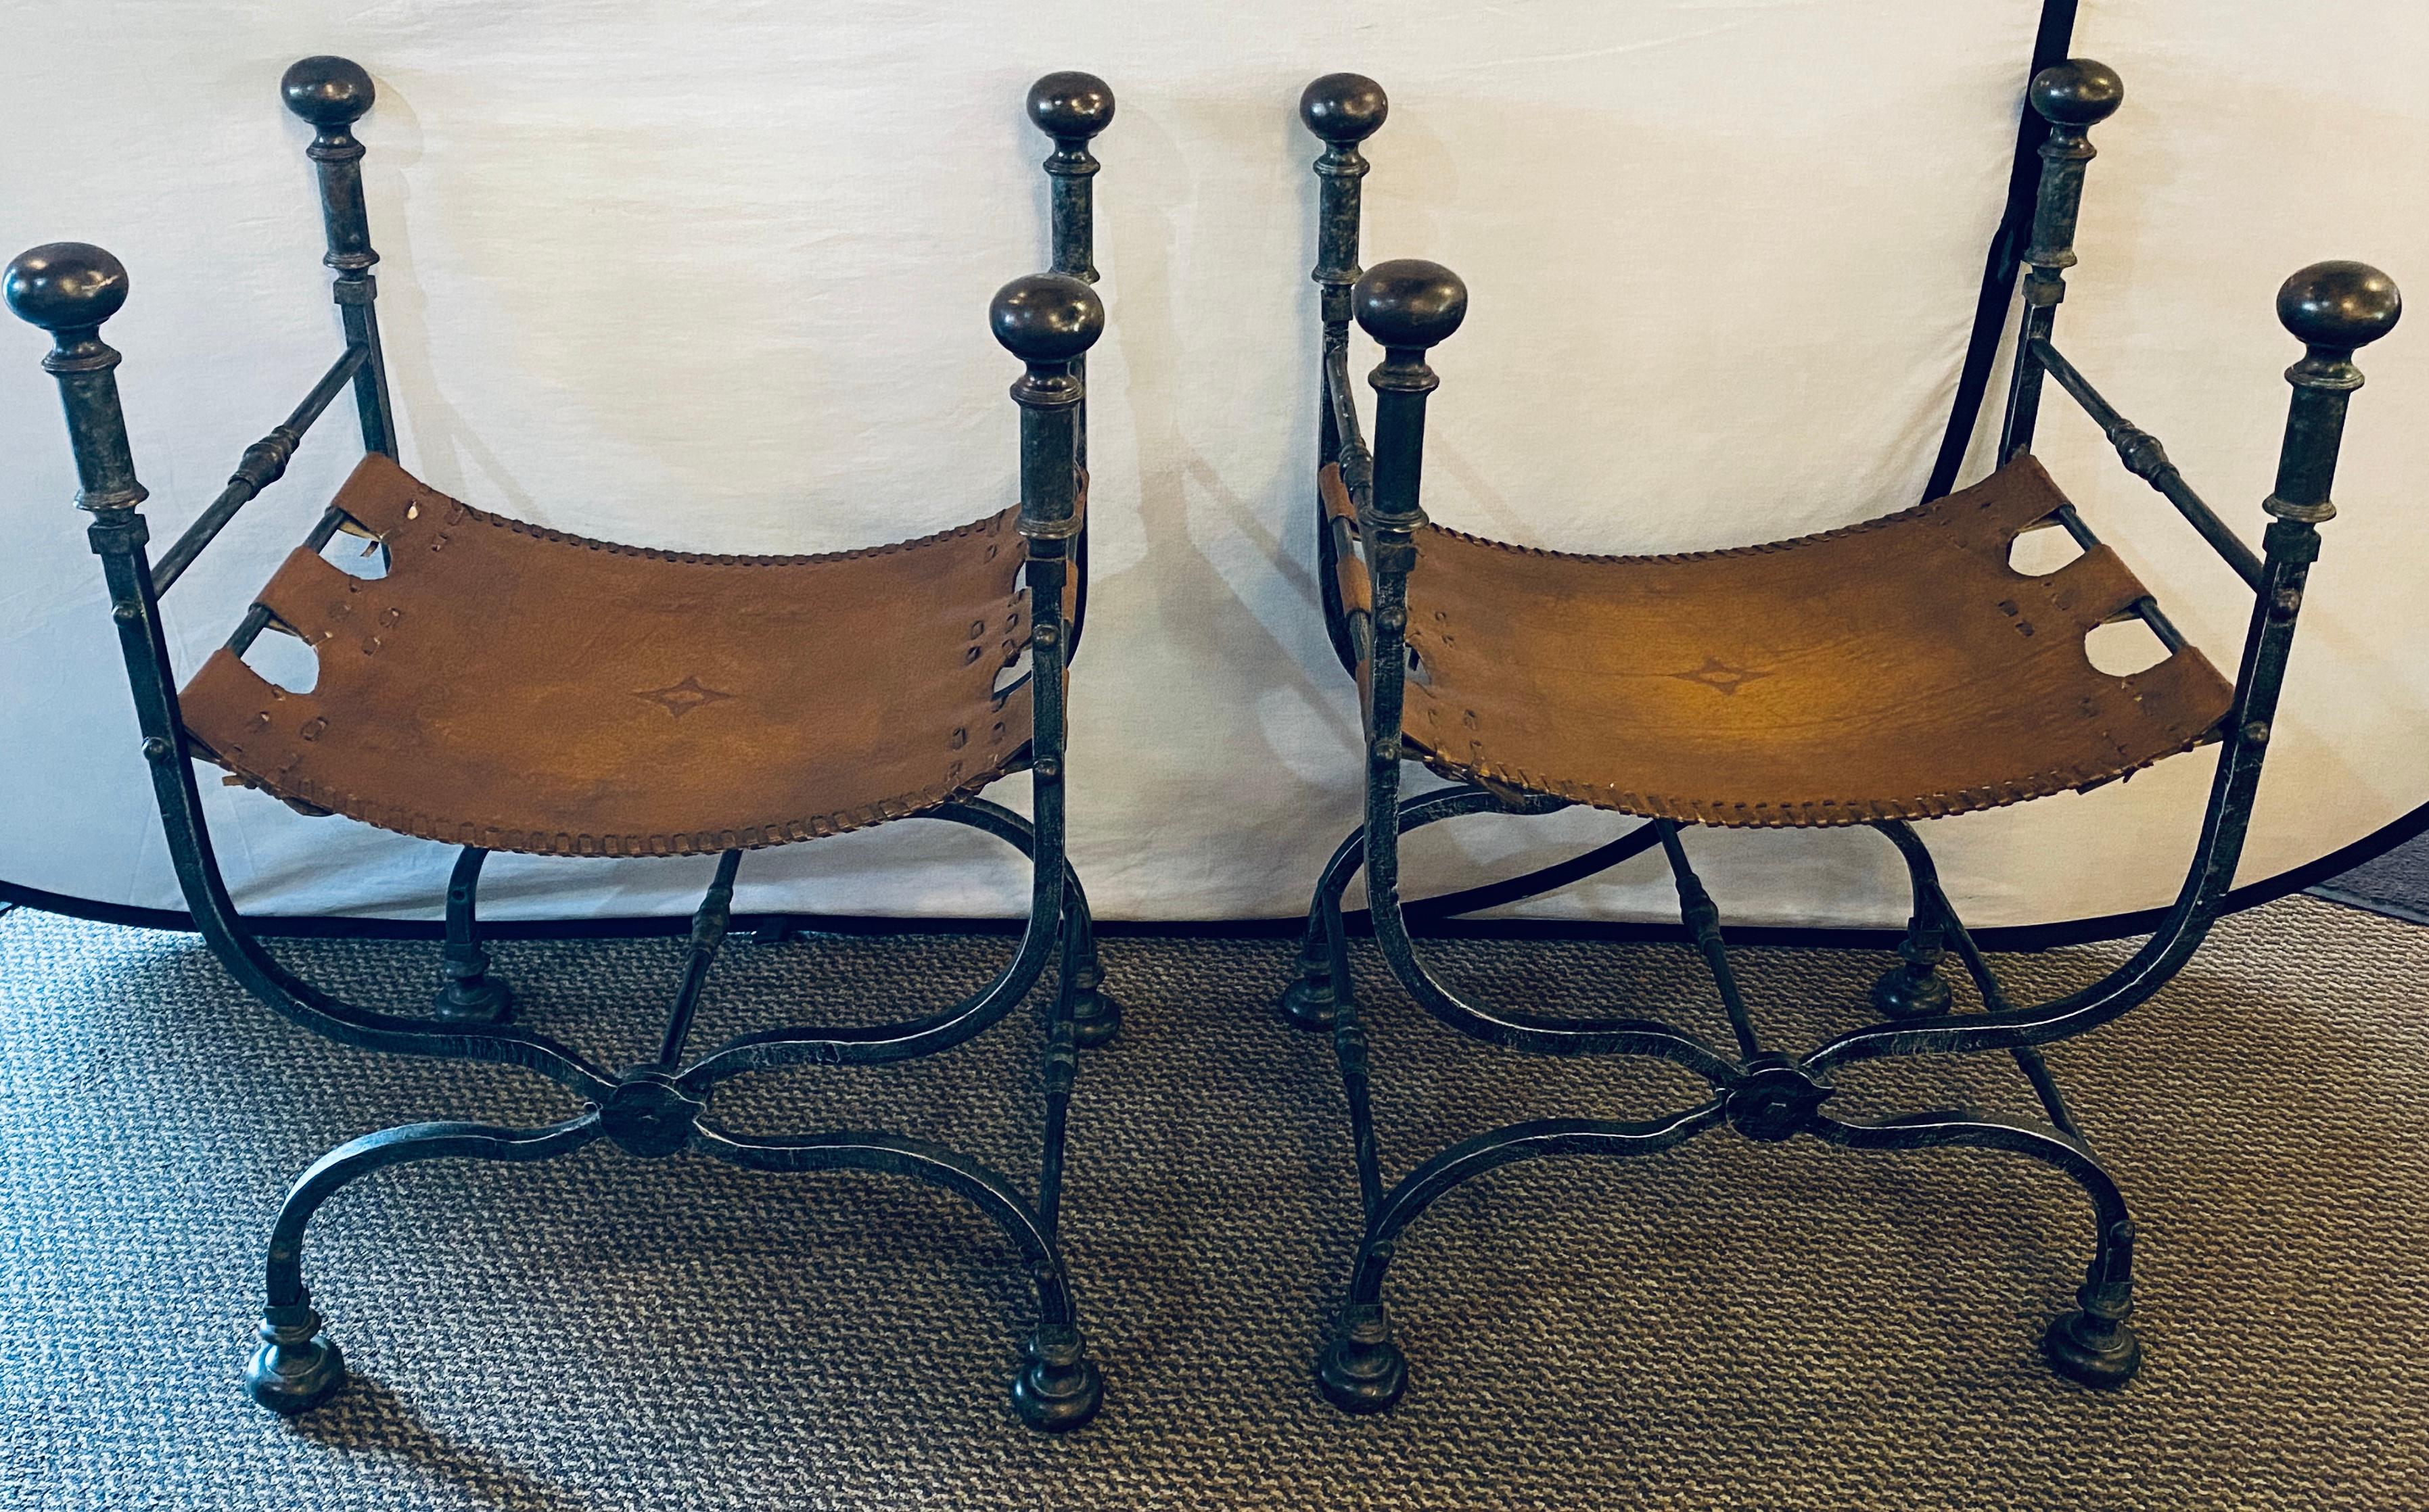 Baroque Pair of Iron and Leather Savonarola Chairs / Benches Folding